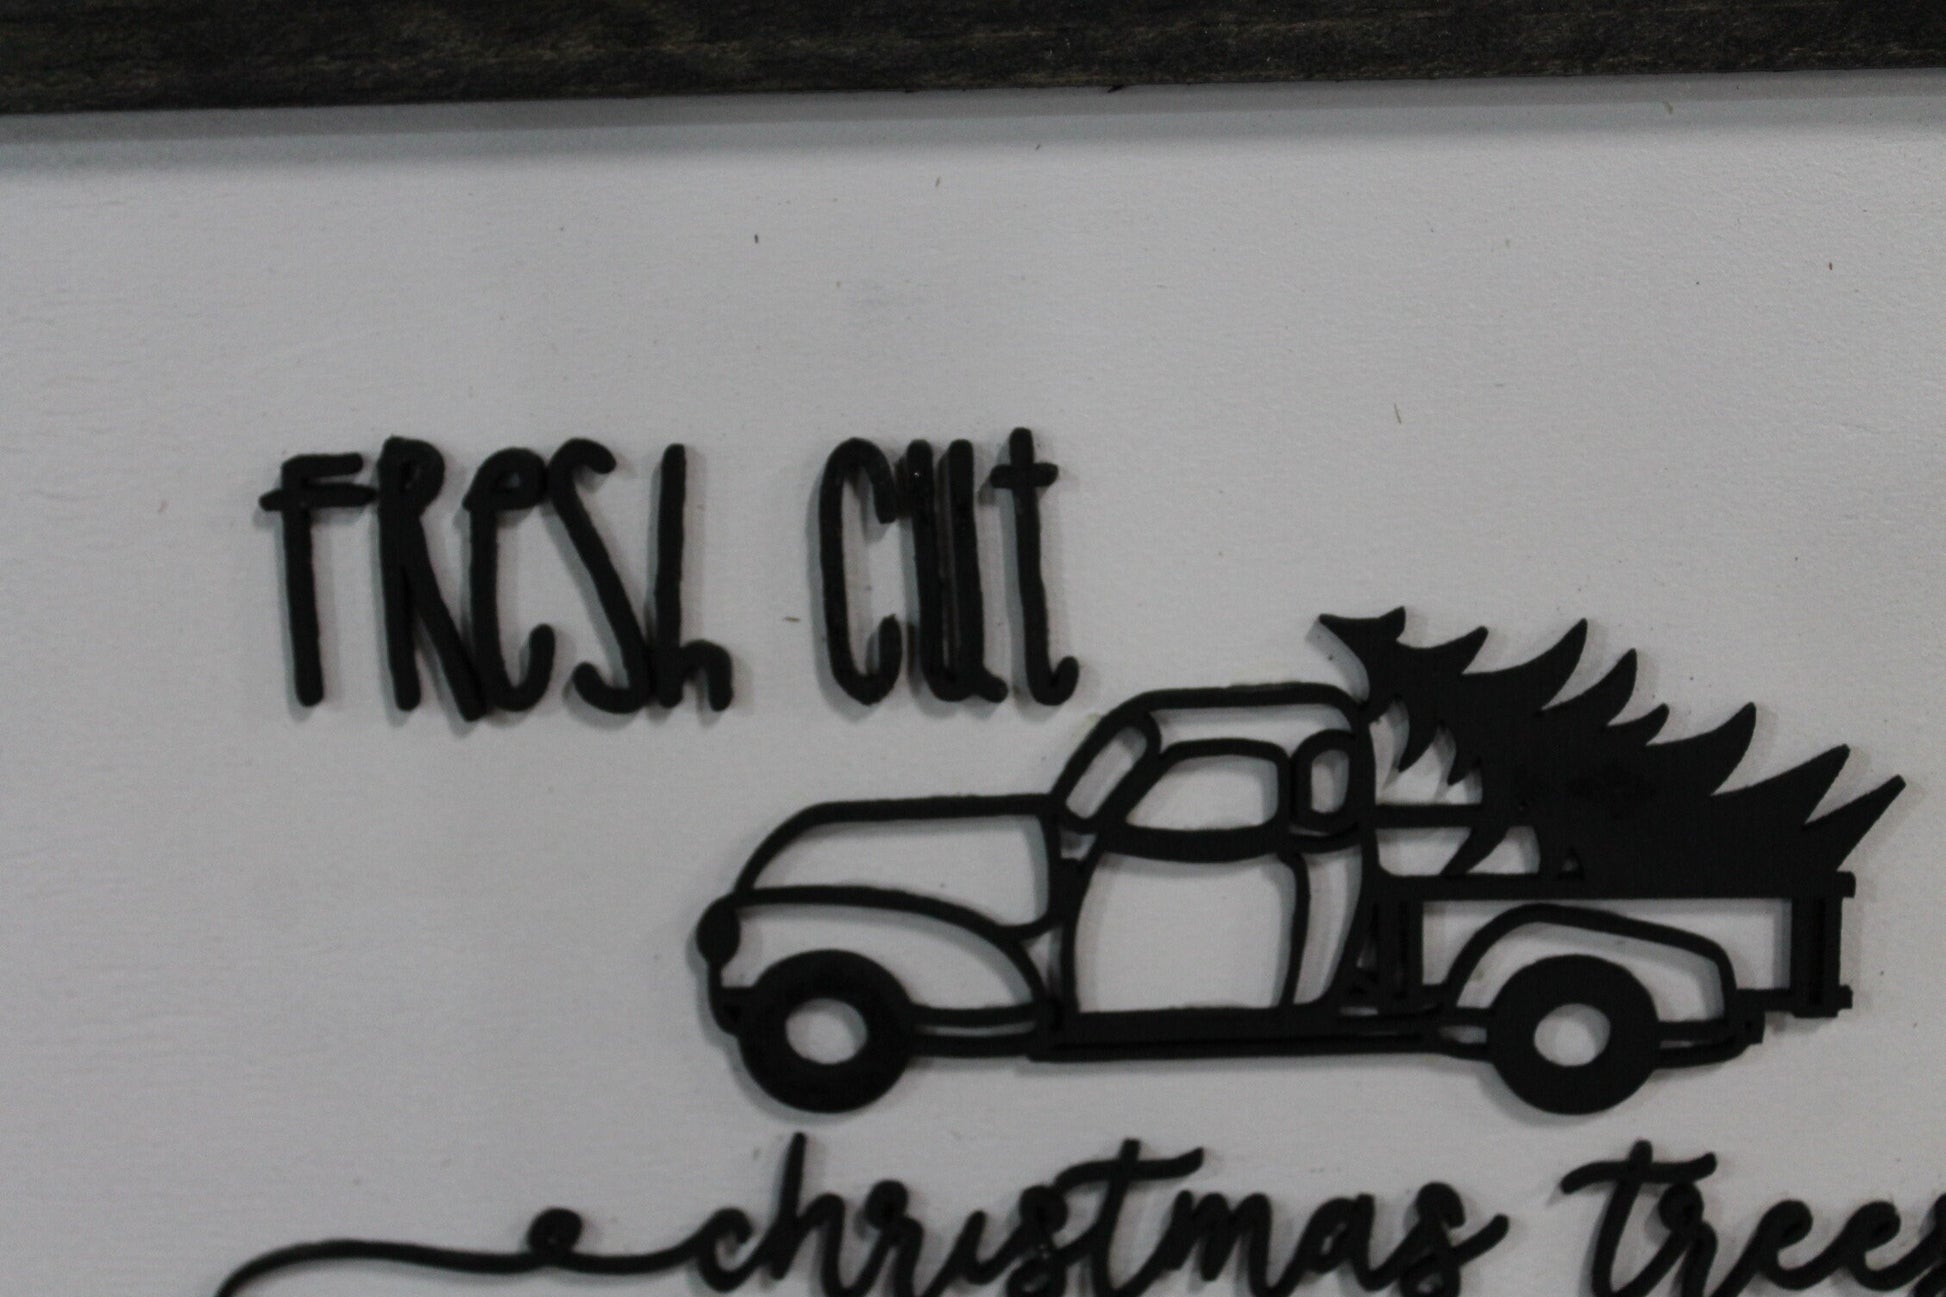 Fresh Cut Christmas Trees, Truck, Raised Text, 3D, Wooden Sign, Wood, Primitive, Shabby Chic, Wall Decor, Black and White, Framed